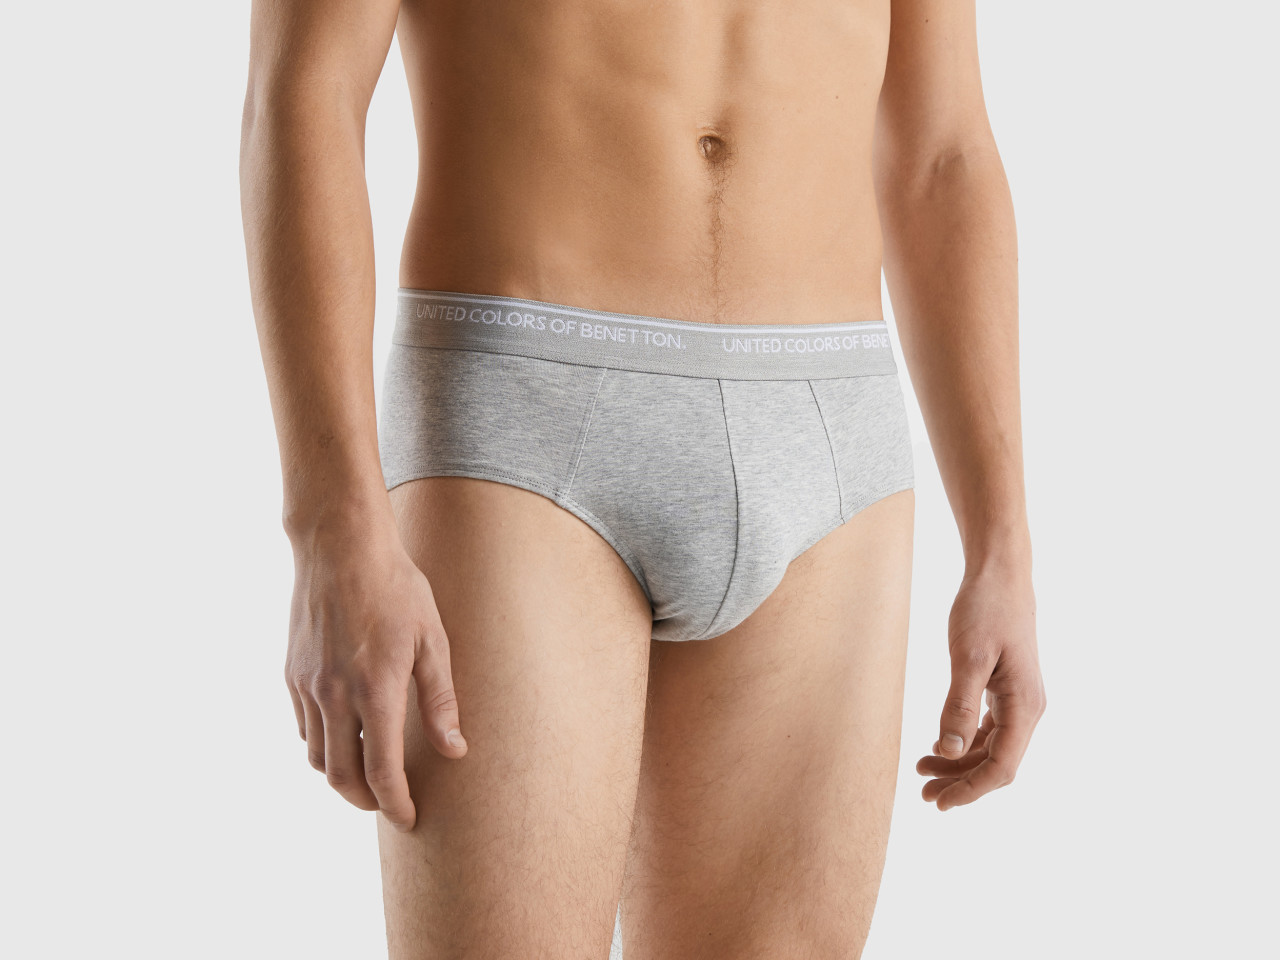 Mens Briefs in Many Colors and Styles. Handmade in USA 